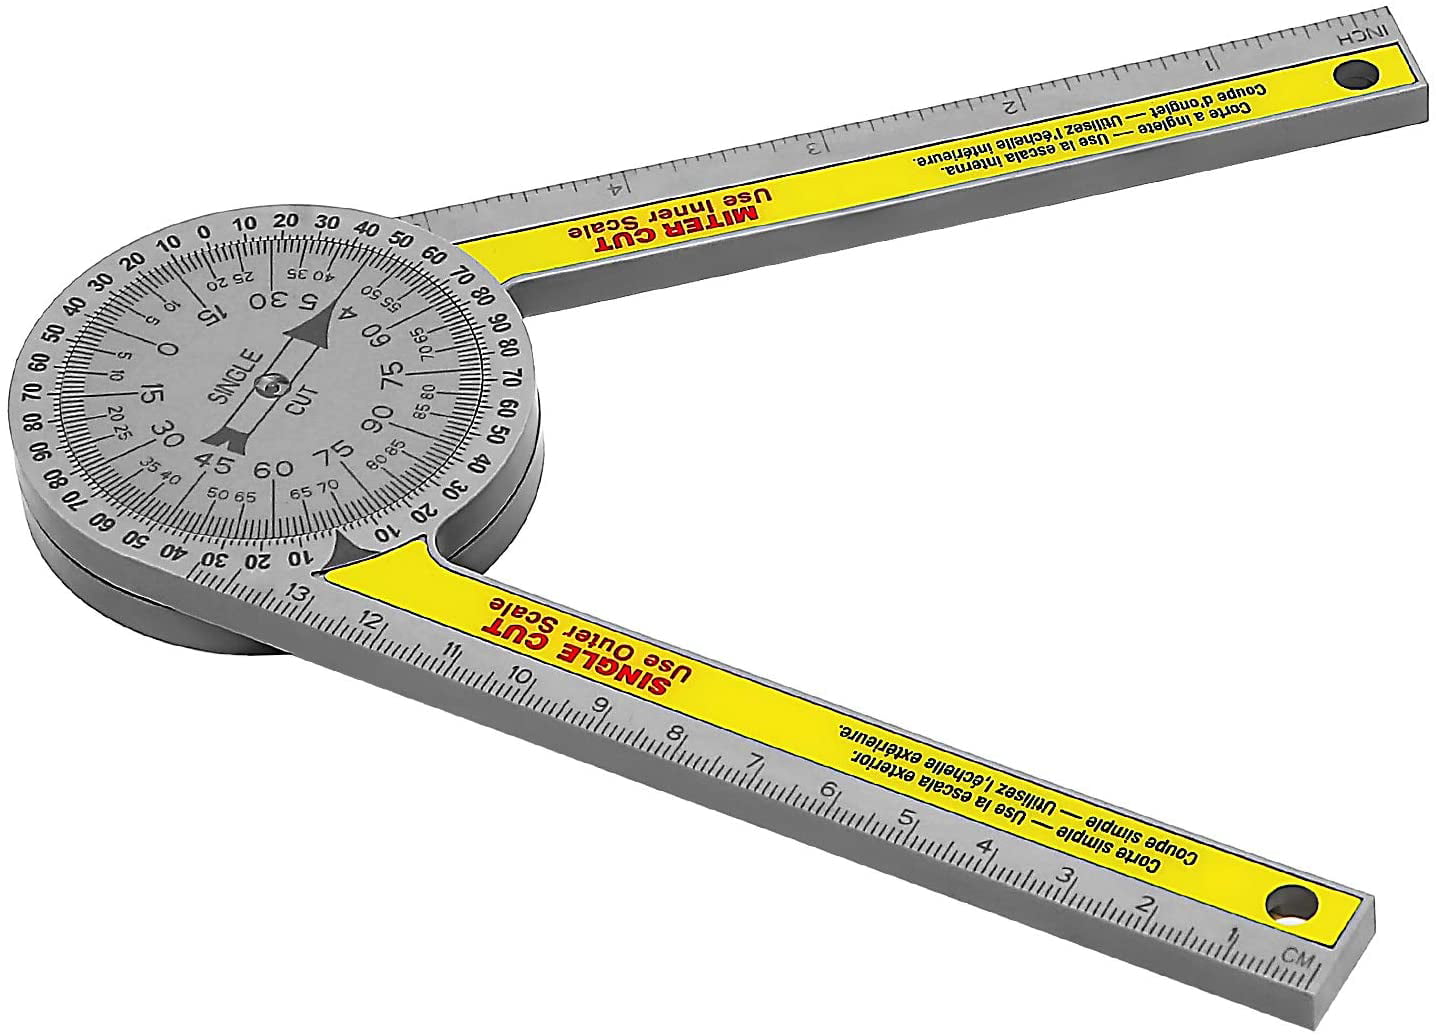 Miter Saw Protractor Pro-Site Accurate Angle Measurements Ruler Carpenter Tools 